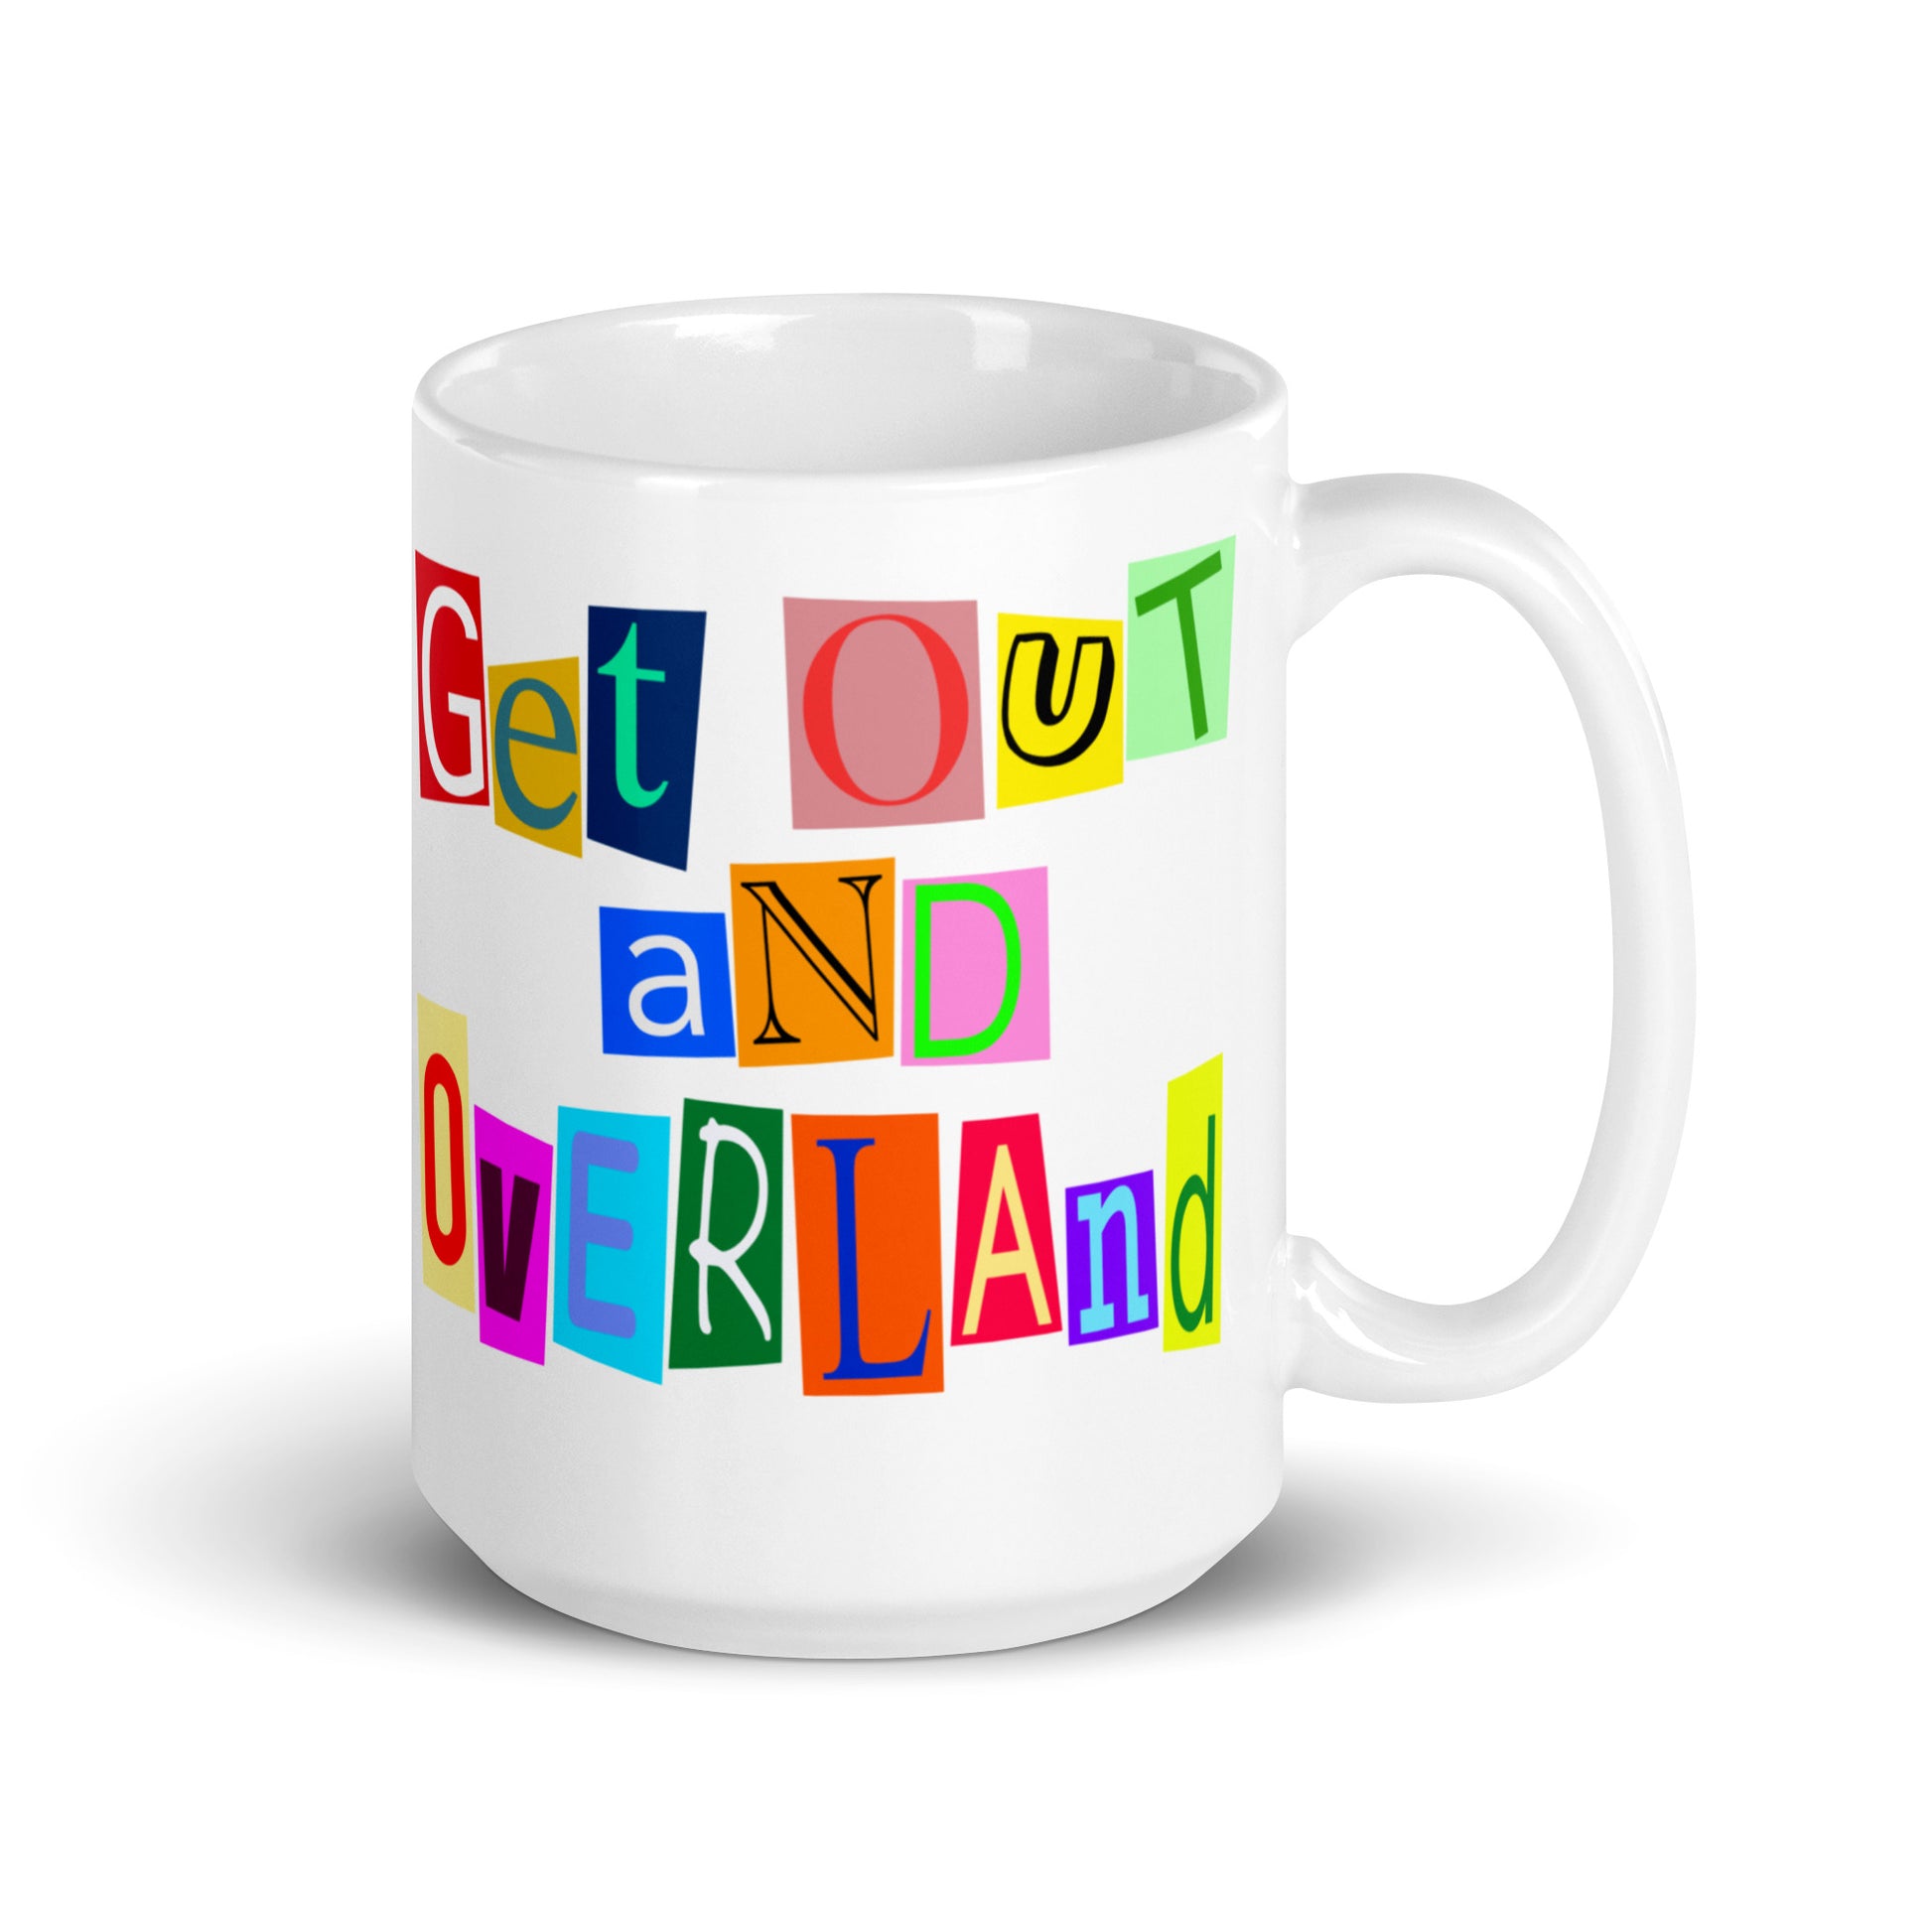 Get OuT aND OvERLand 15oz coffee mug - front view. overland365.com